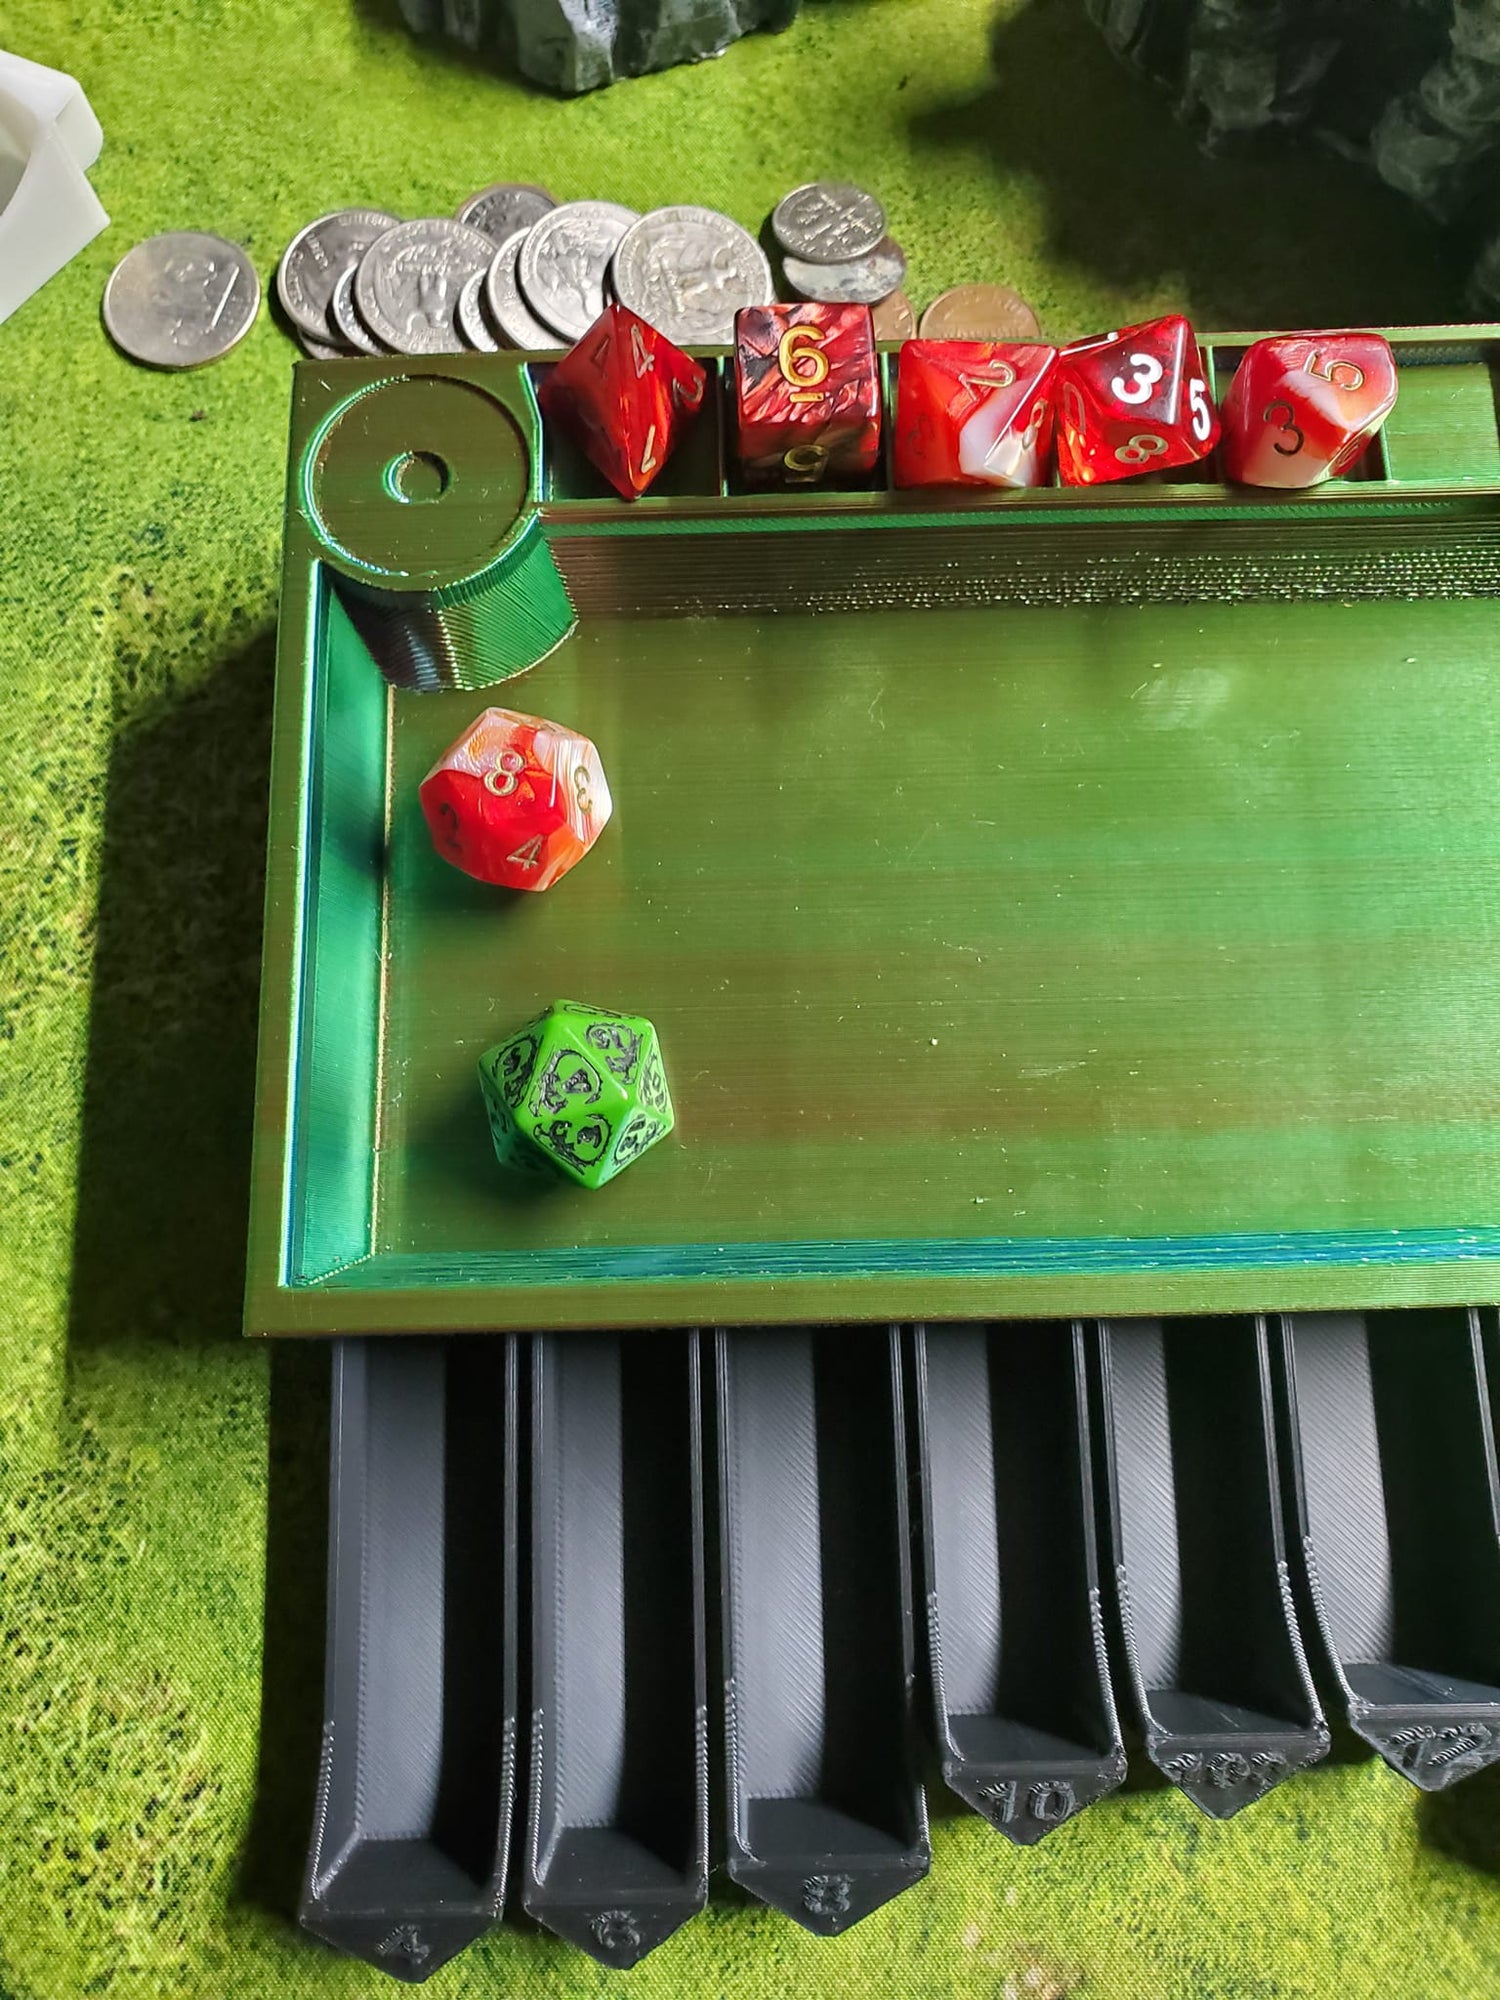 Custom red, blue, green, dice tray with black retractable drawers, each holding a set of vibrant red gaming dice, designed for Dungeons and Dragons and other tabletop games, displayed on a textured green surface.